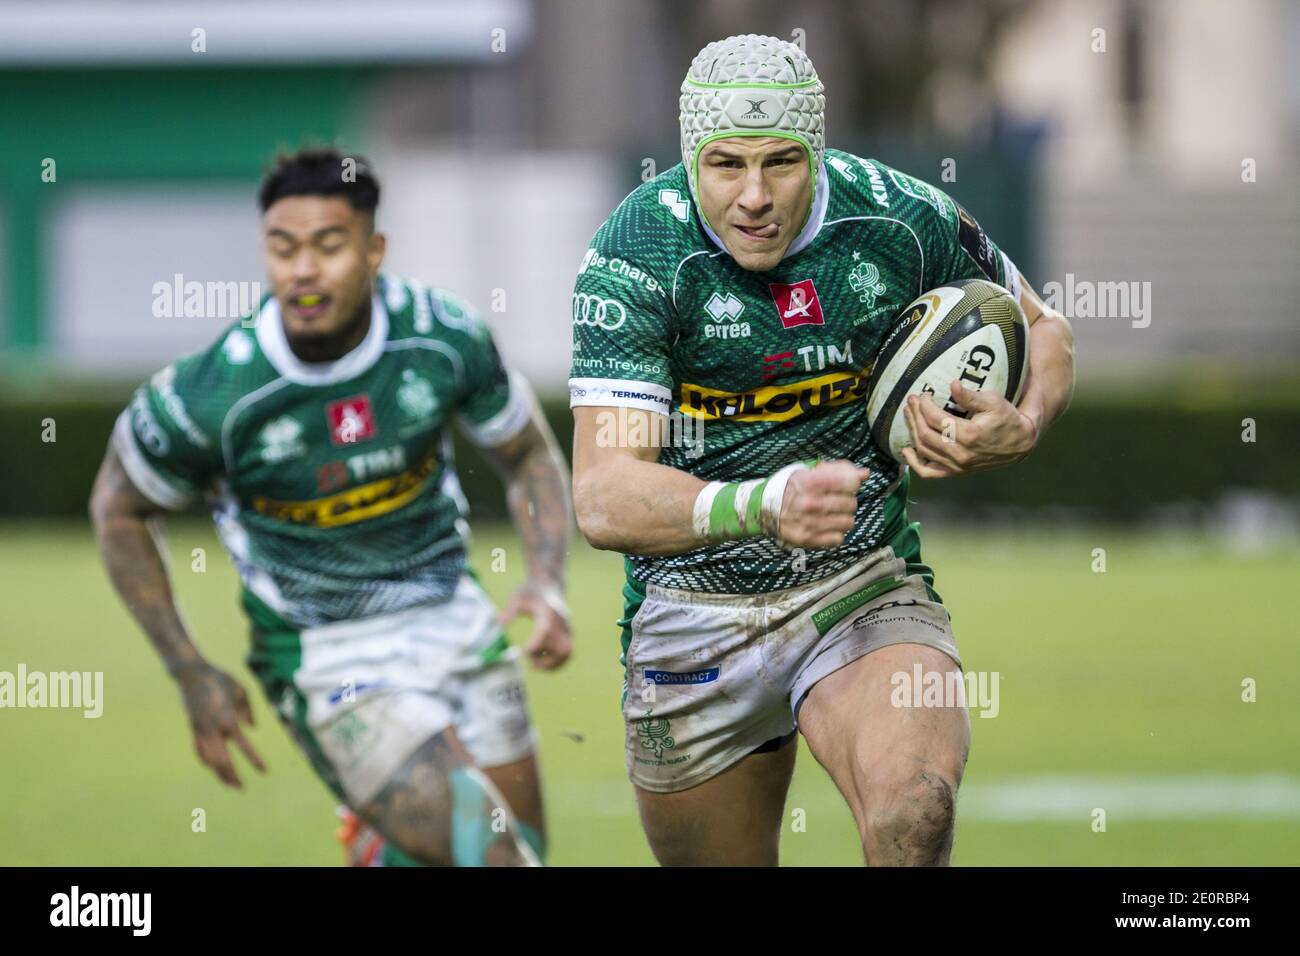 Treviso, Italy. 2nd Jan, 2021. Treviso, Italy, Monigo Stadium, January 02, 2021, nacho brex benetton during Benetton Treviso vs Zebre Rugby - Rugby Guinness Pro 14 match Credit: Alfio Guarise/LPS/ZUMA Wire/Alamy Live News Stock Photo